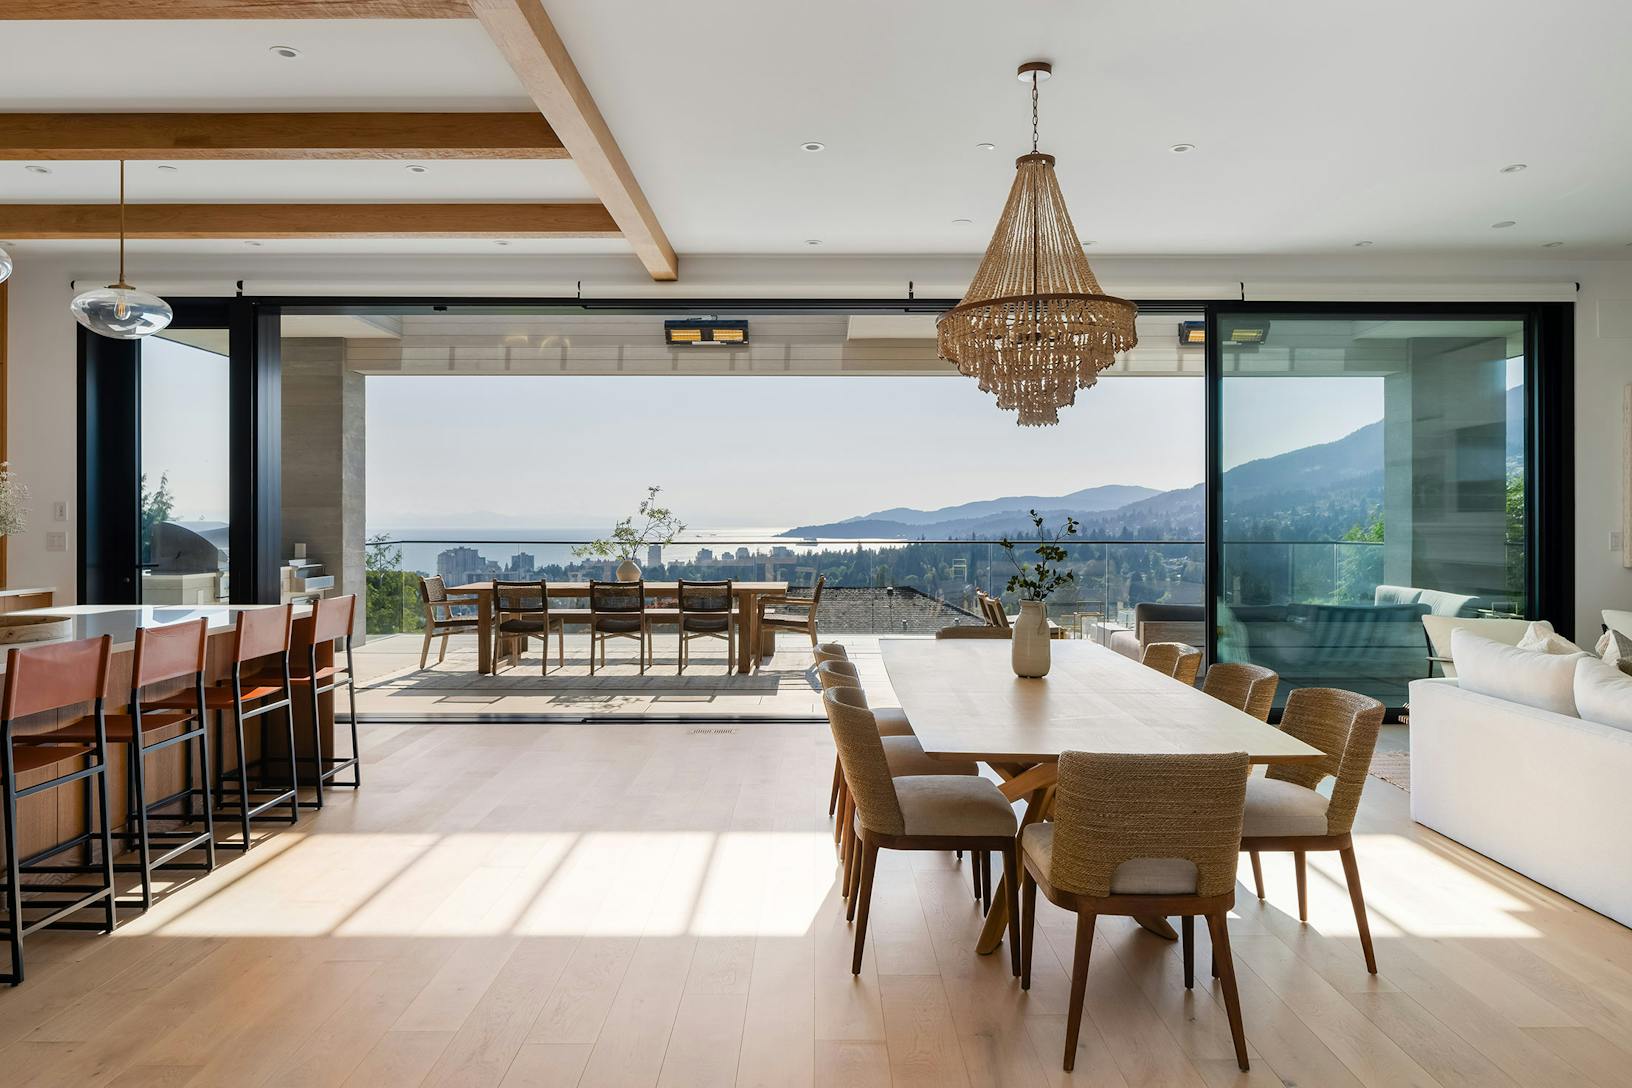 A living room with glass walls that offer a stunning view of the mountains